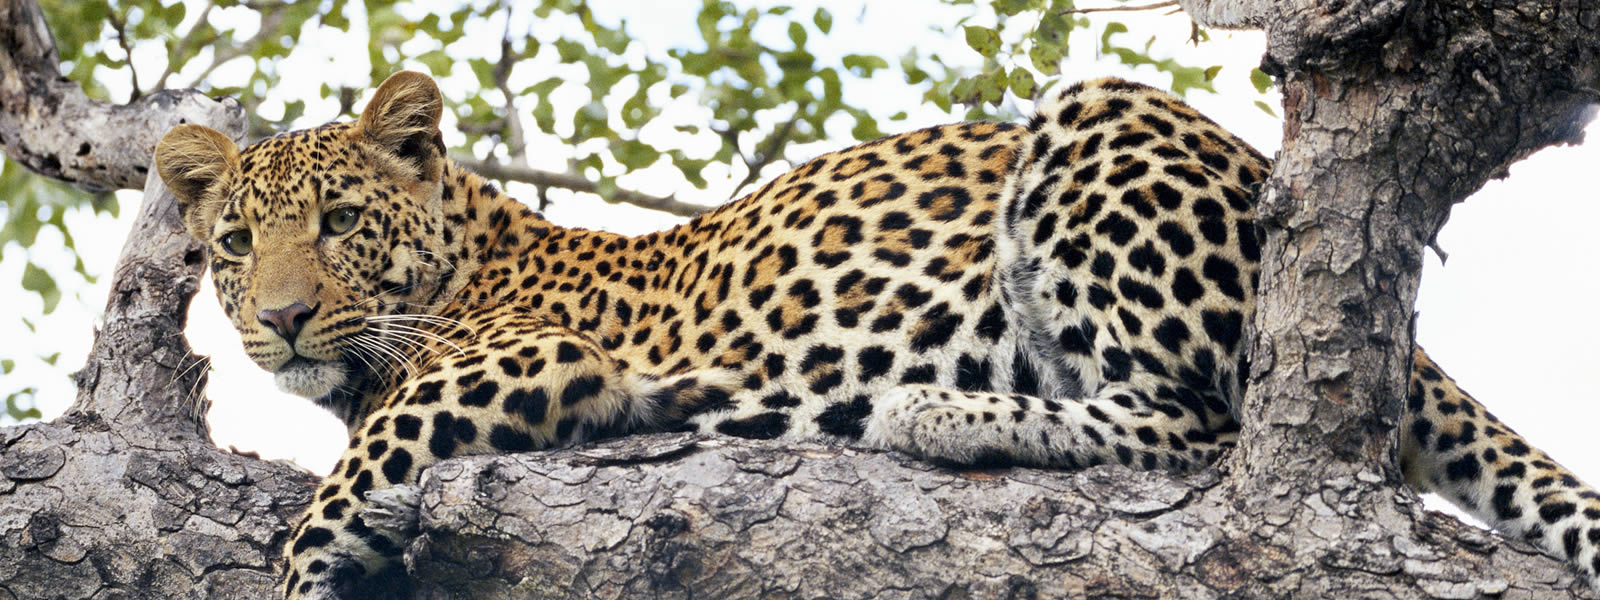 Leopard Panthera pardus perched on a tree branch